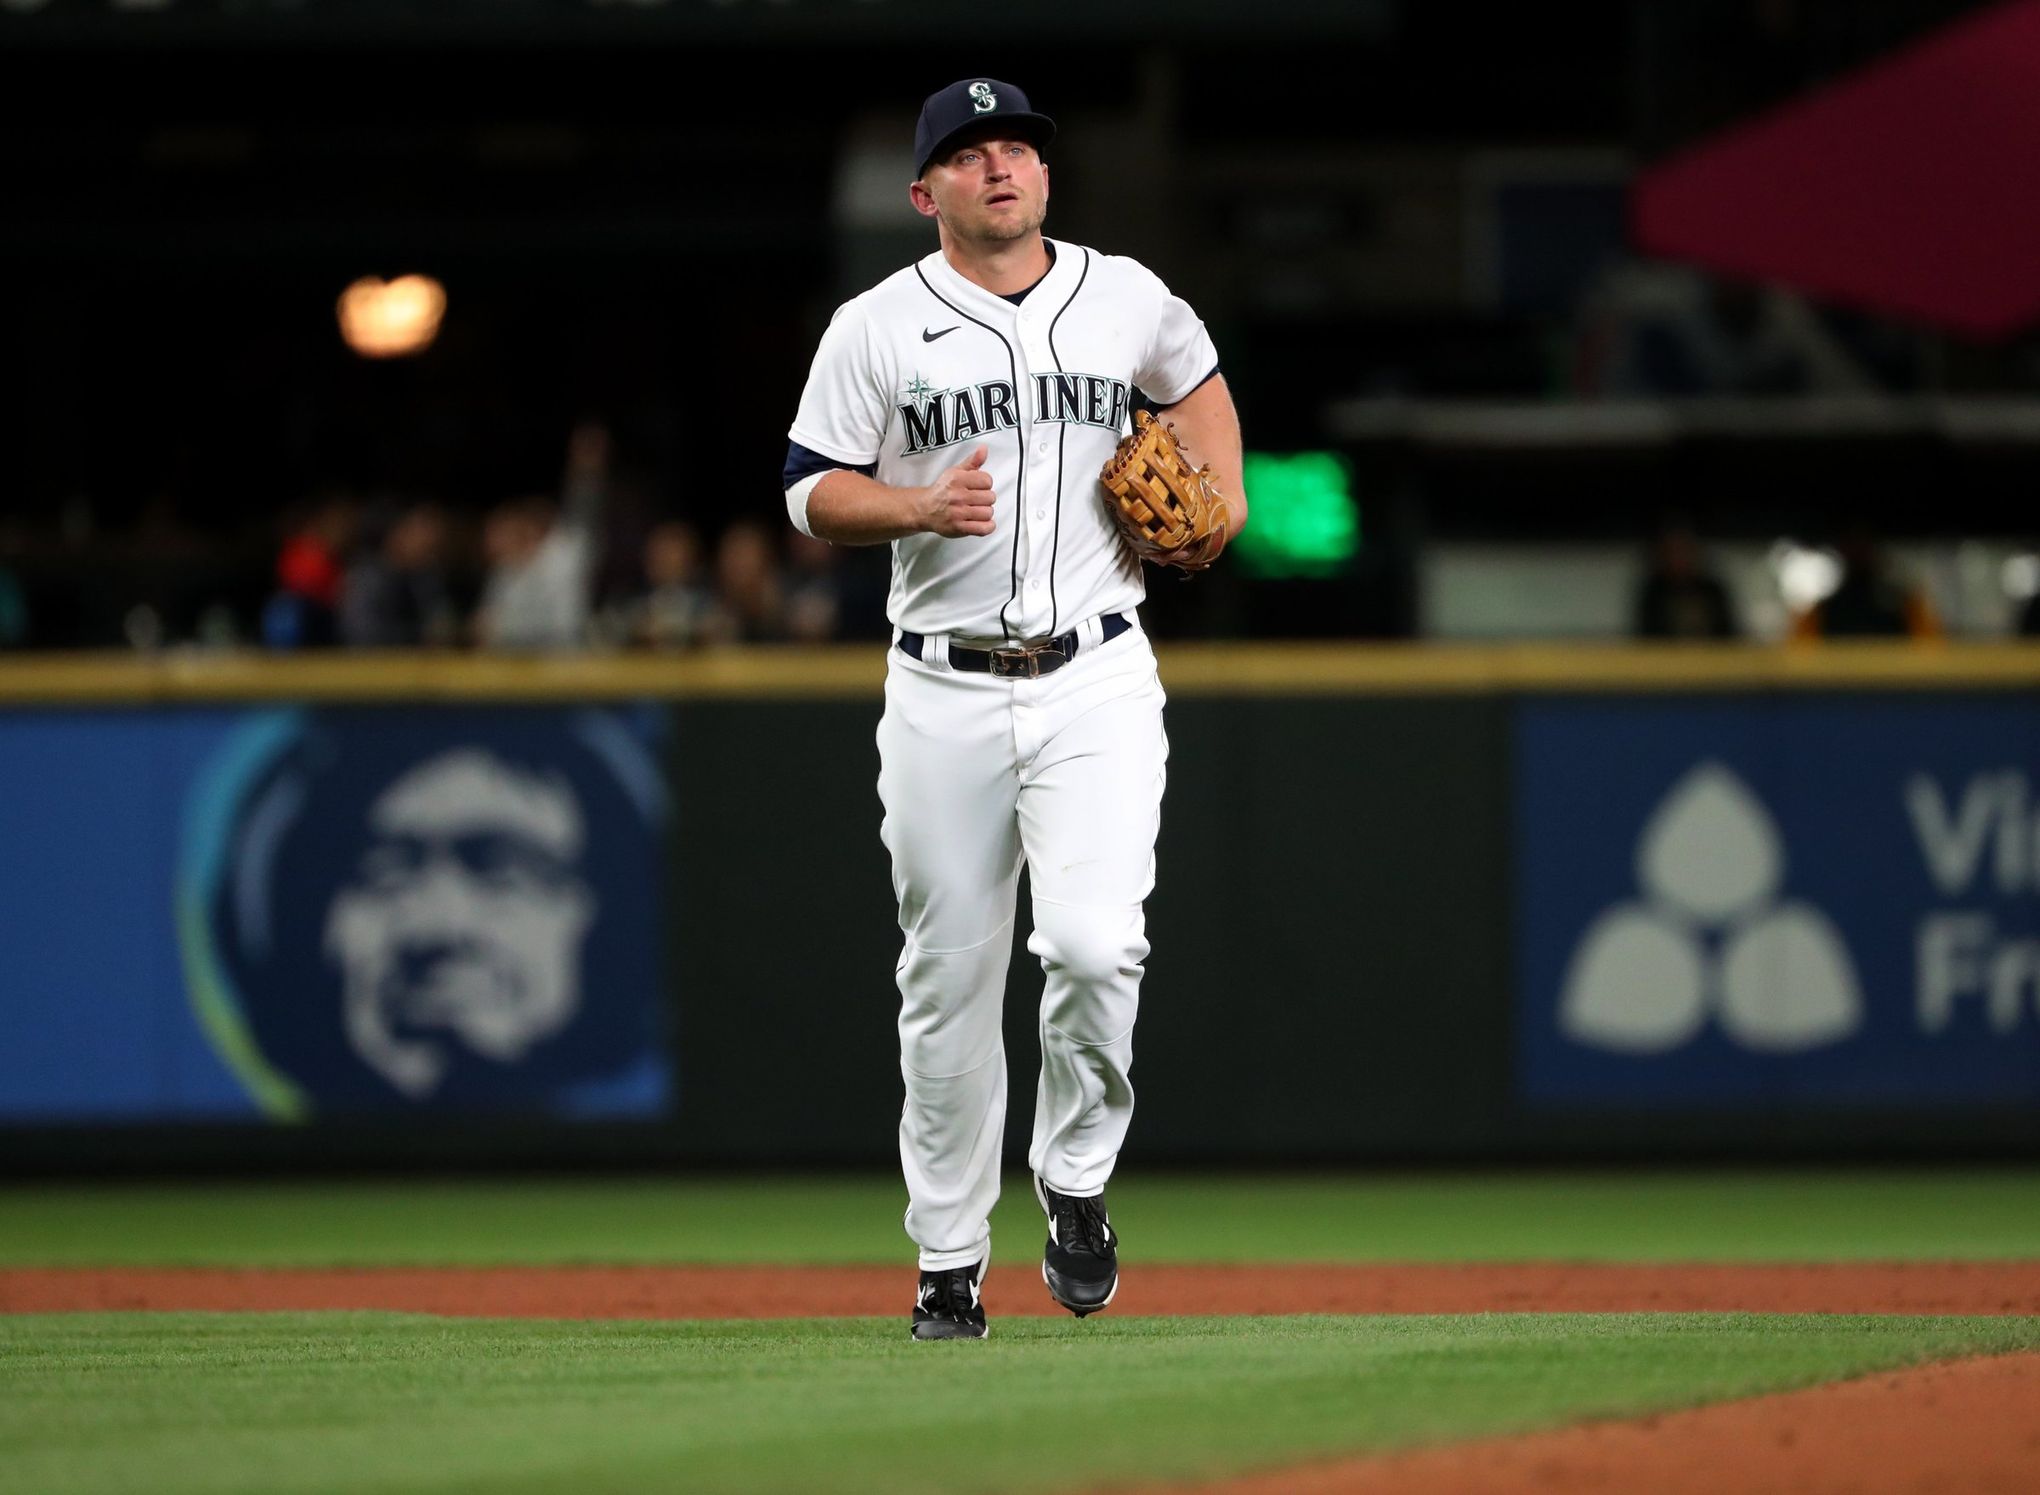 If this is Kyle Seager's last season in a Mariners uniform, he's going to  make it count